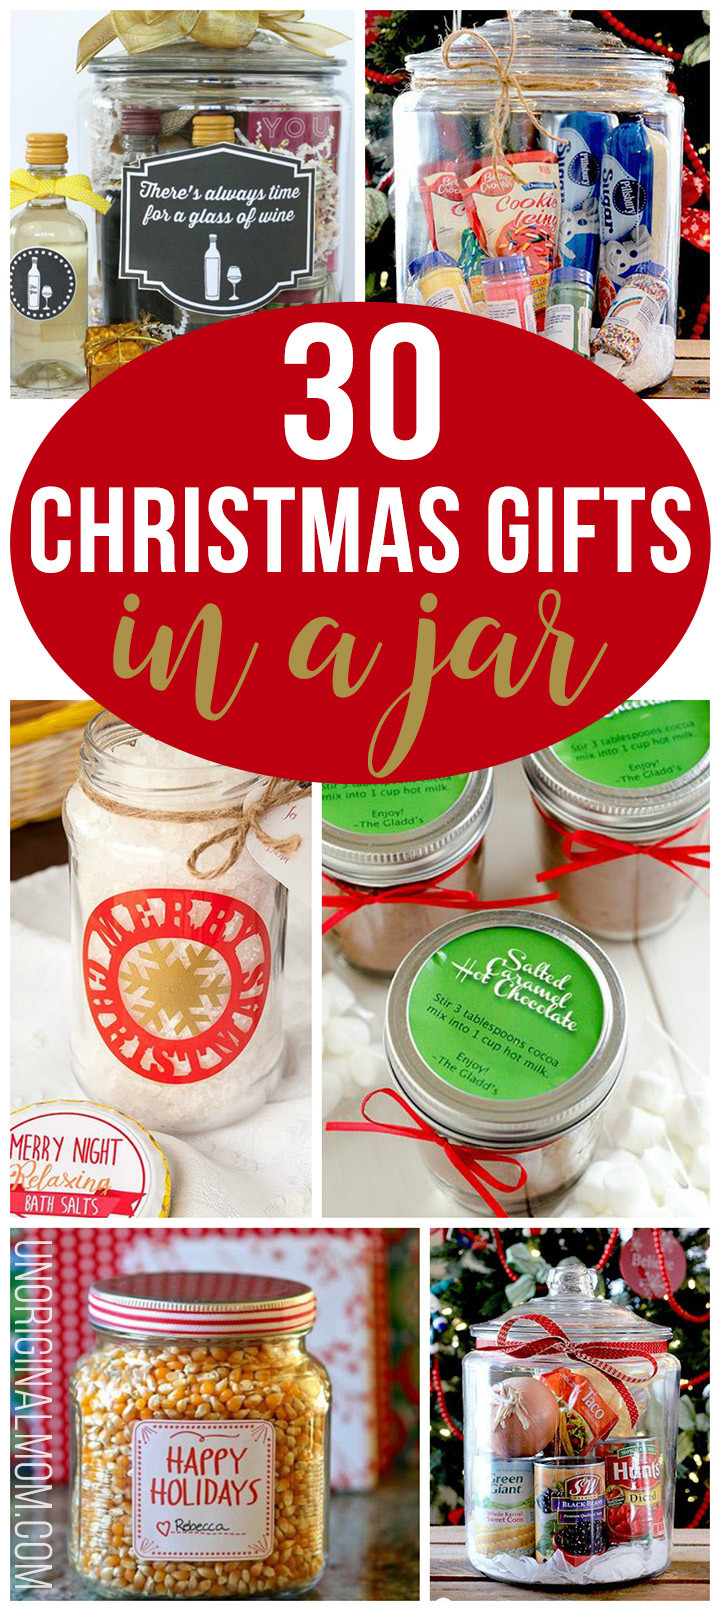 Unique Christmas Gift Ideas
 30 Christmas Gifts in a Jar unOriginal Mom